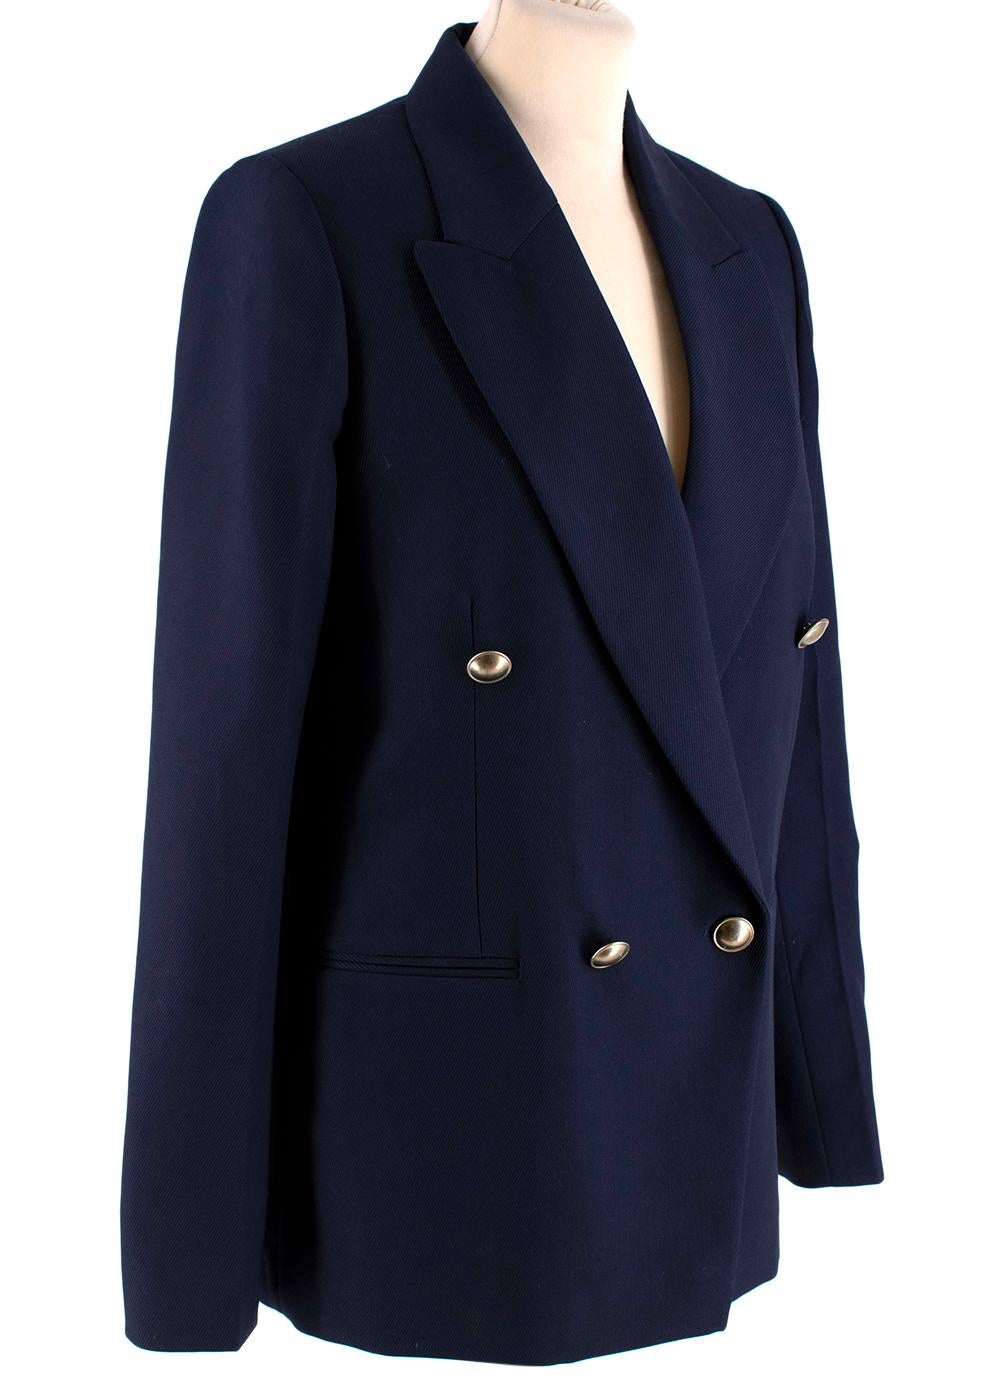 Victoria Beckham Double Breasted Navy Blazer

- Double-breasted gold button fastening
- Front welt pockets
- Vent-less back
- Partially lined

Materials: 
100% Wool
Lining - 100% Viscose
Lining 2 - 100% Cotton

Dry clean only
Made in Italy 

PLEASE